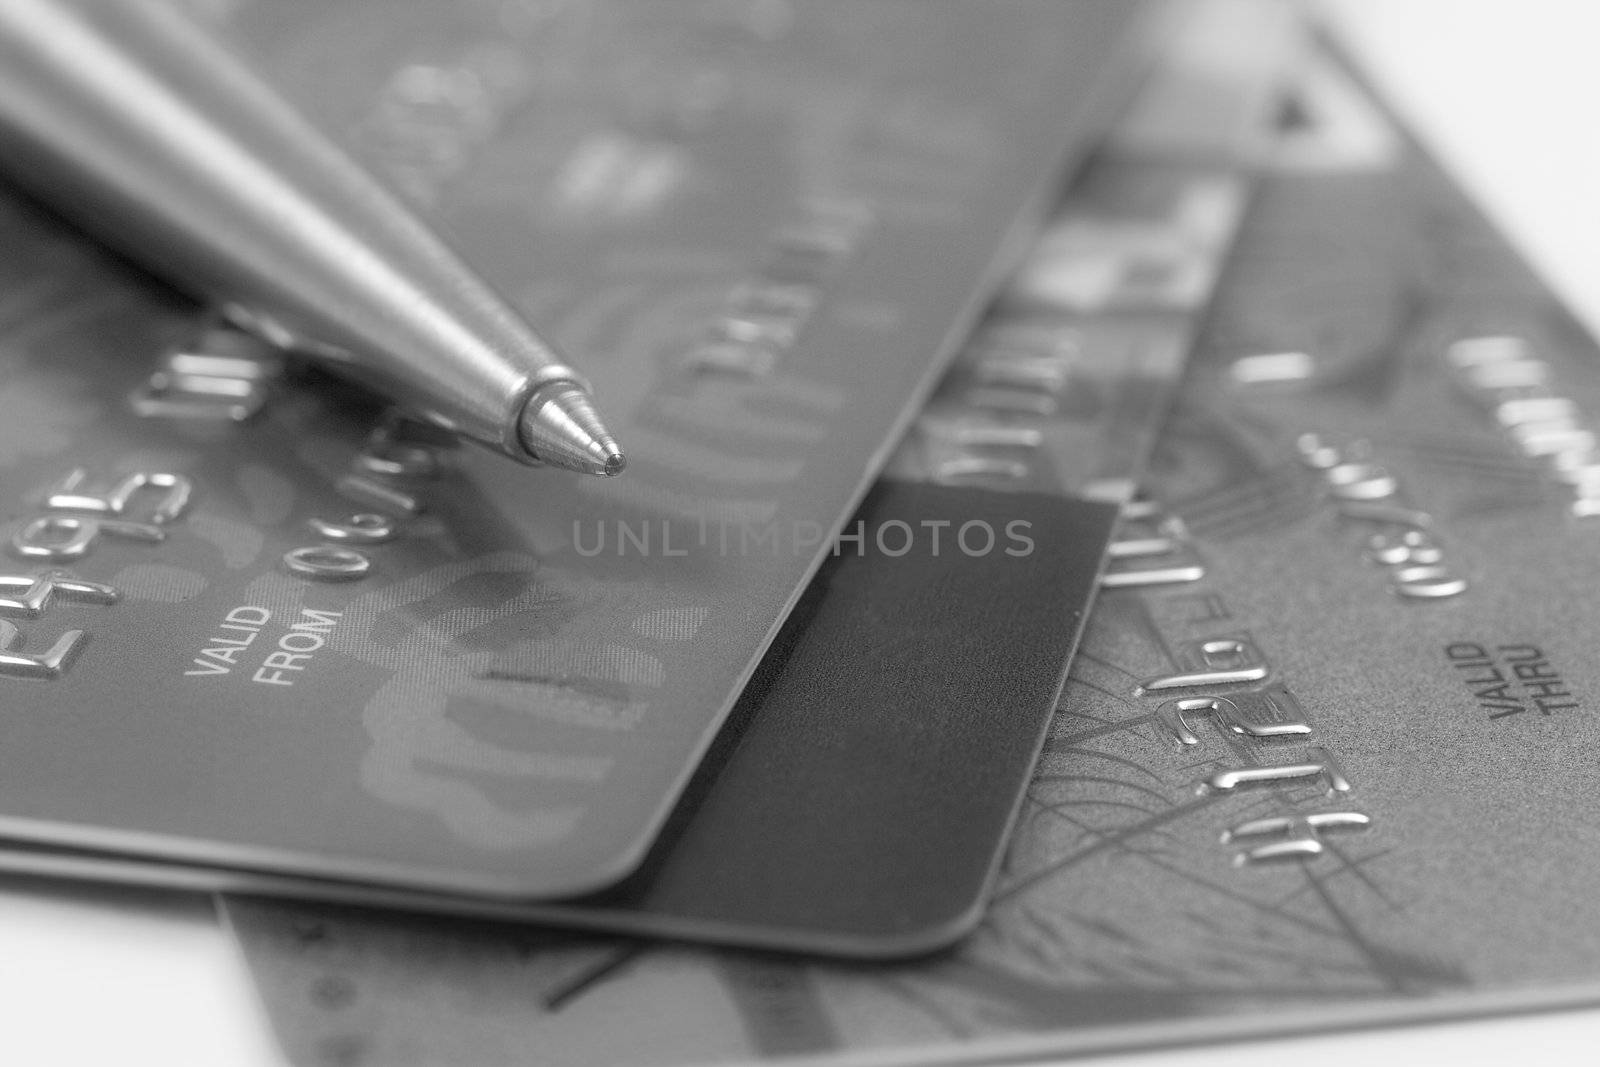 Pen on stack of credit cards. Shallow depth of field. Black and white image